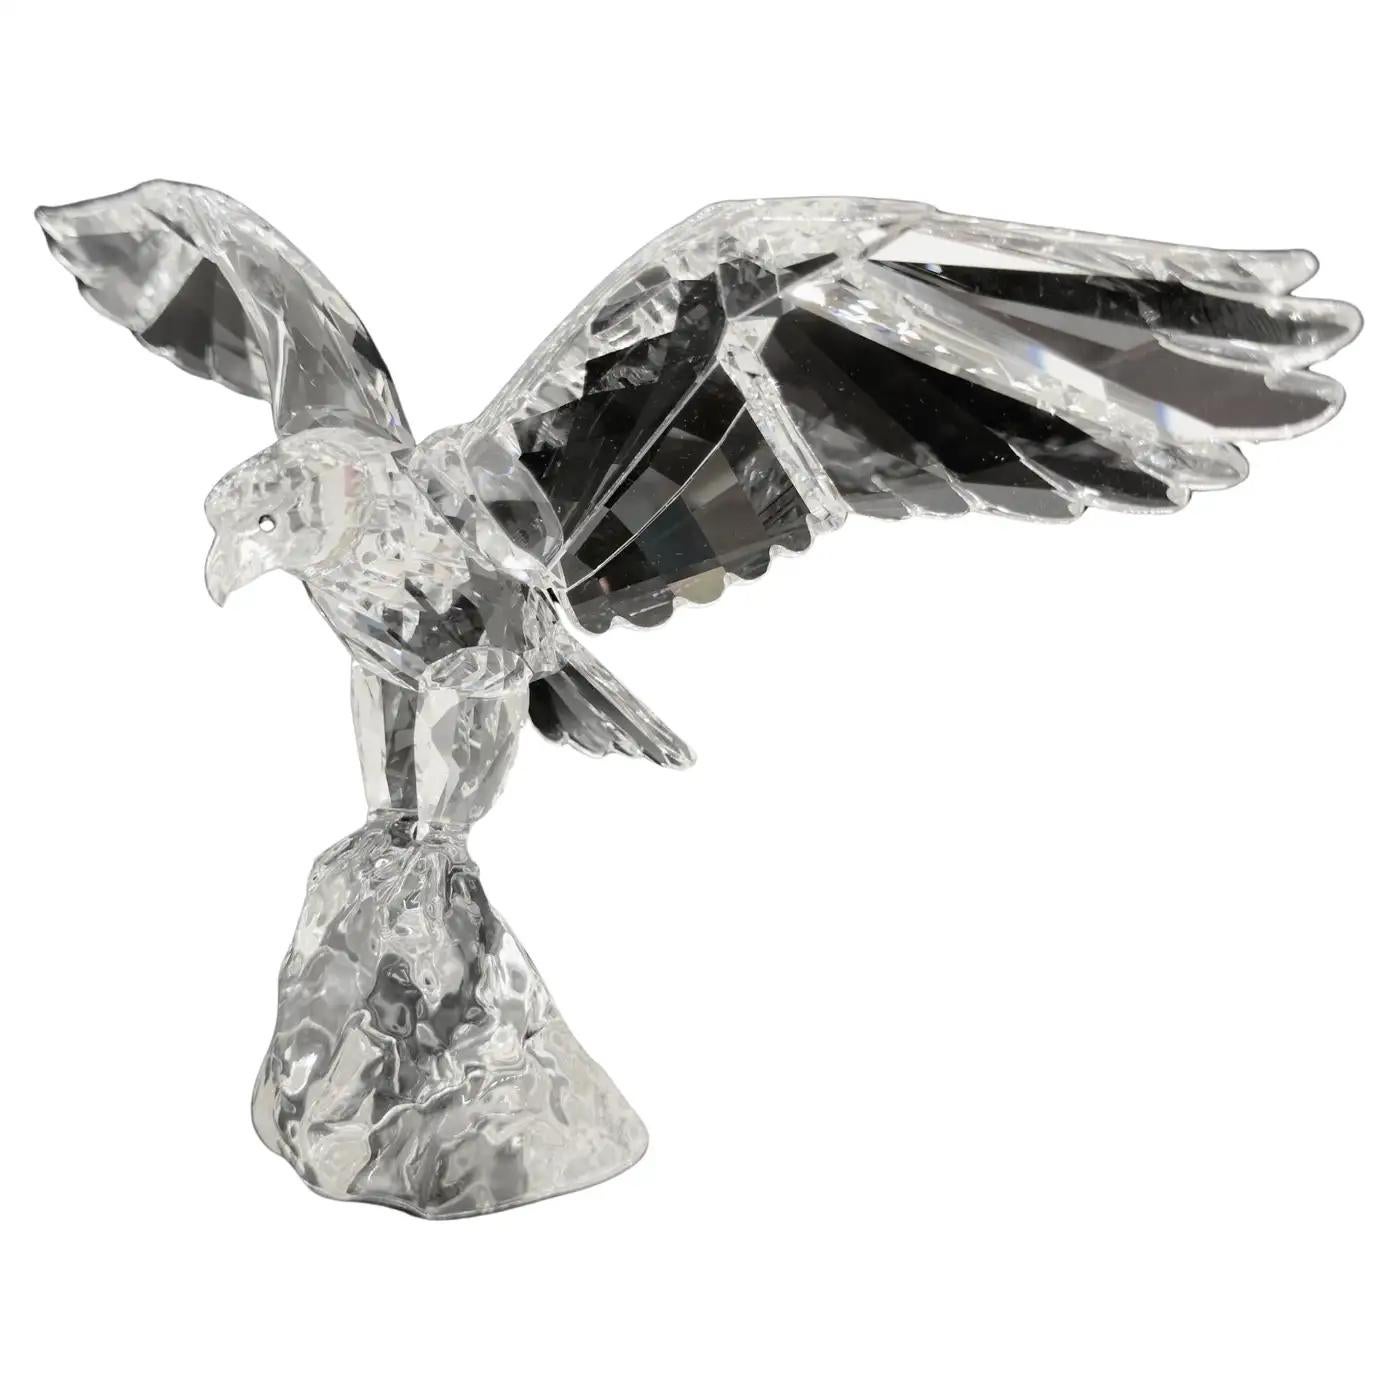 A Swarovski Eagle figurine made of high quality crystal and designed by Anton Hirzinger. Made in Australia, the figurine shows an eagle with its wings outspread and poised to take flight.  Symbol of strength and freedom, this rare Eagle sculpture is